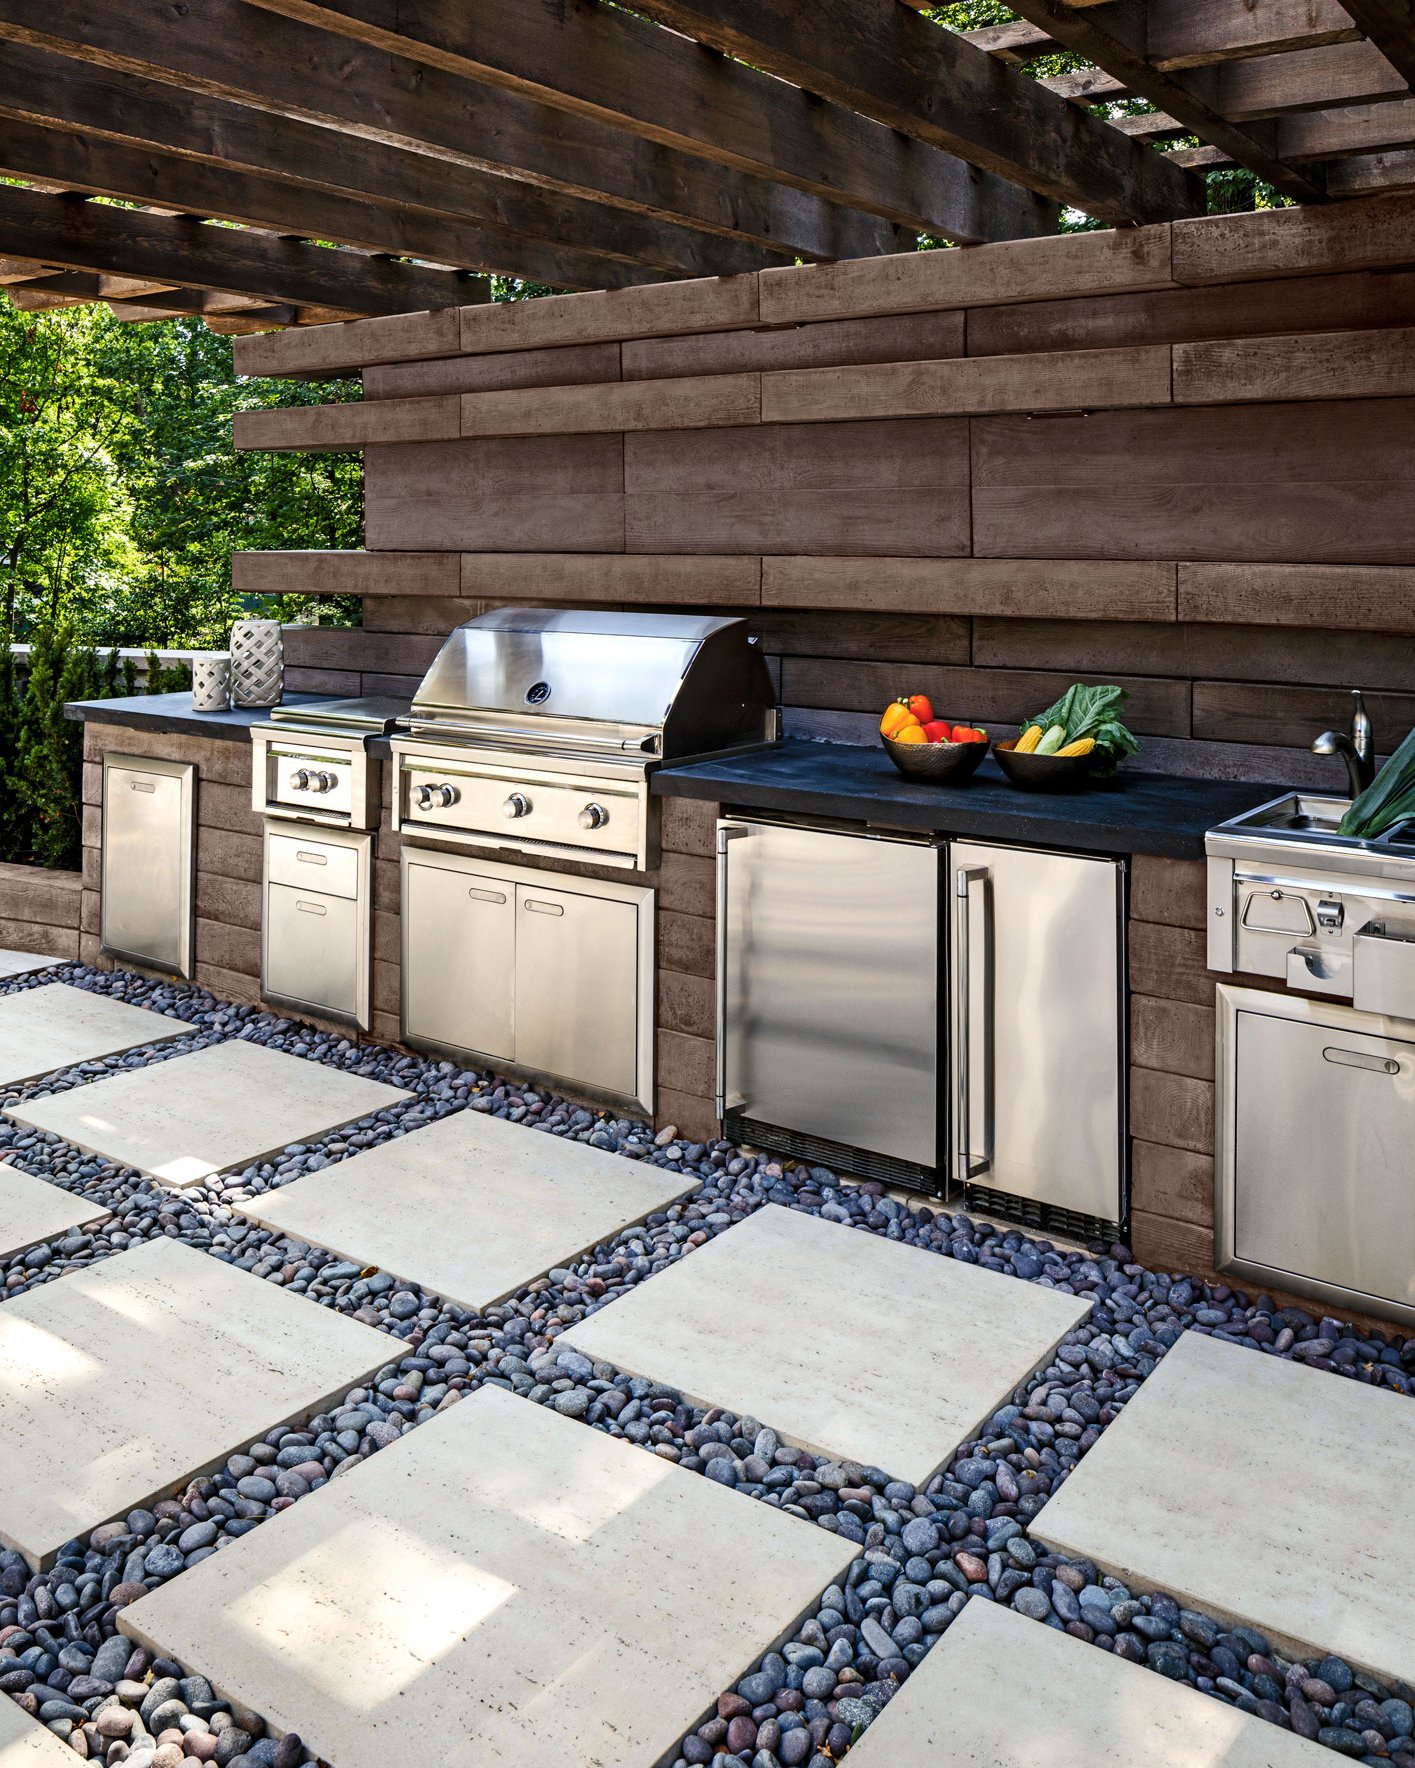 Outdoor Kitchen Countertop Details, Materials, and Ideas to Ponder